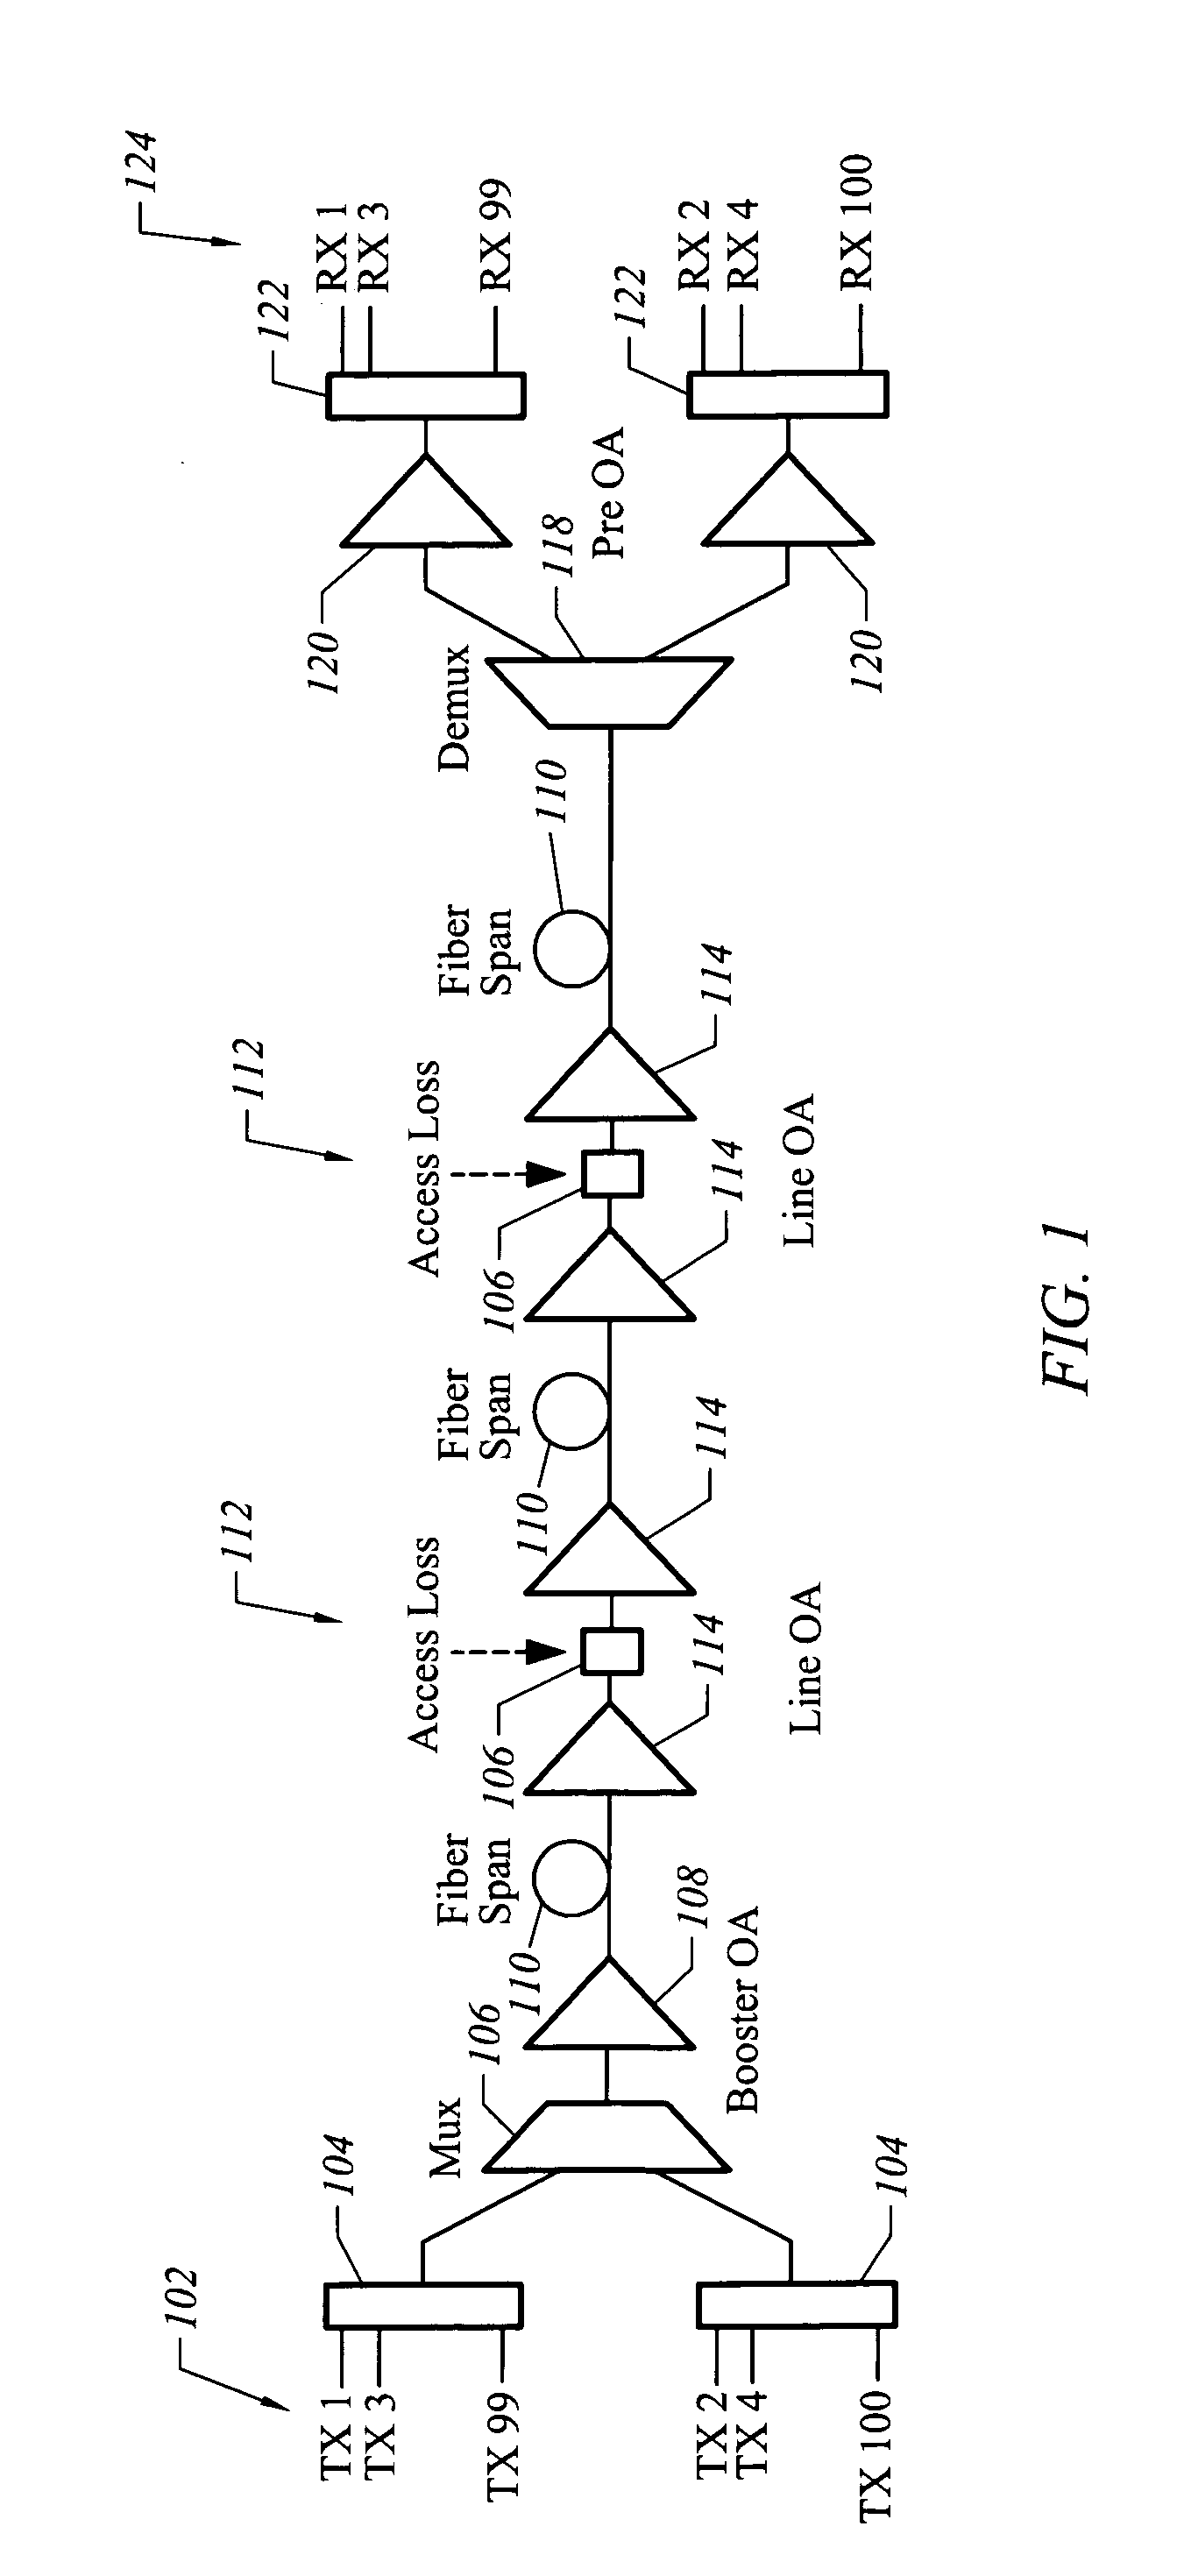 Lumped Raman amplification structure for very wideband applications